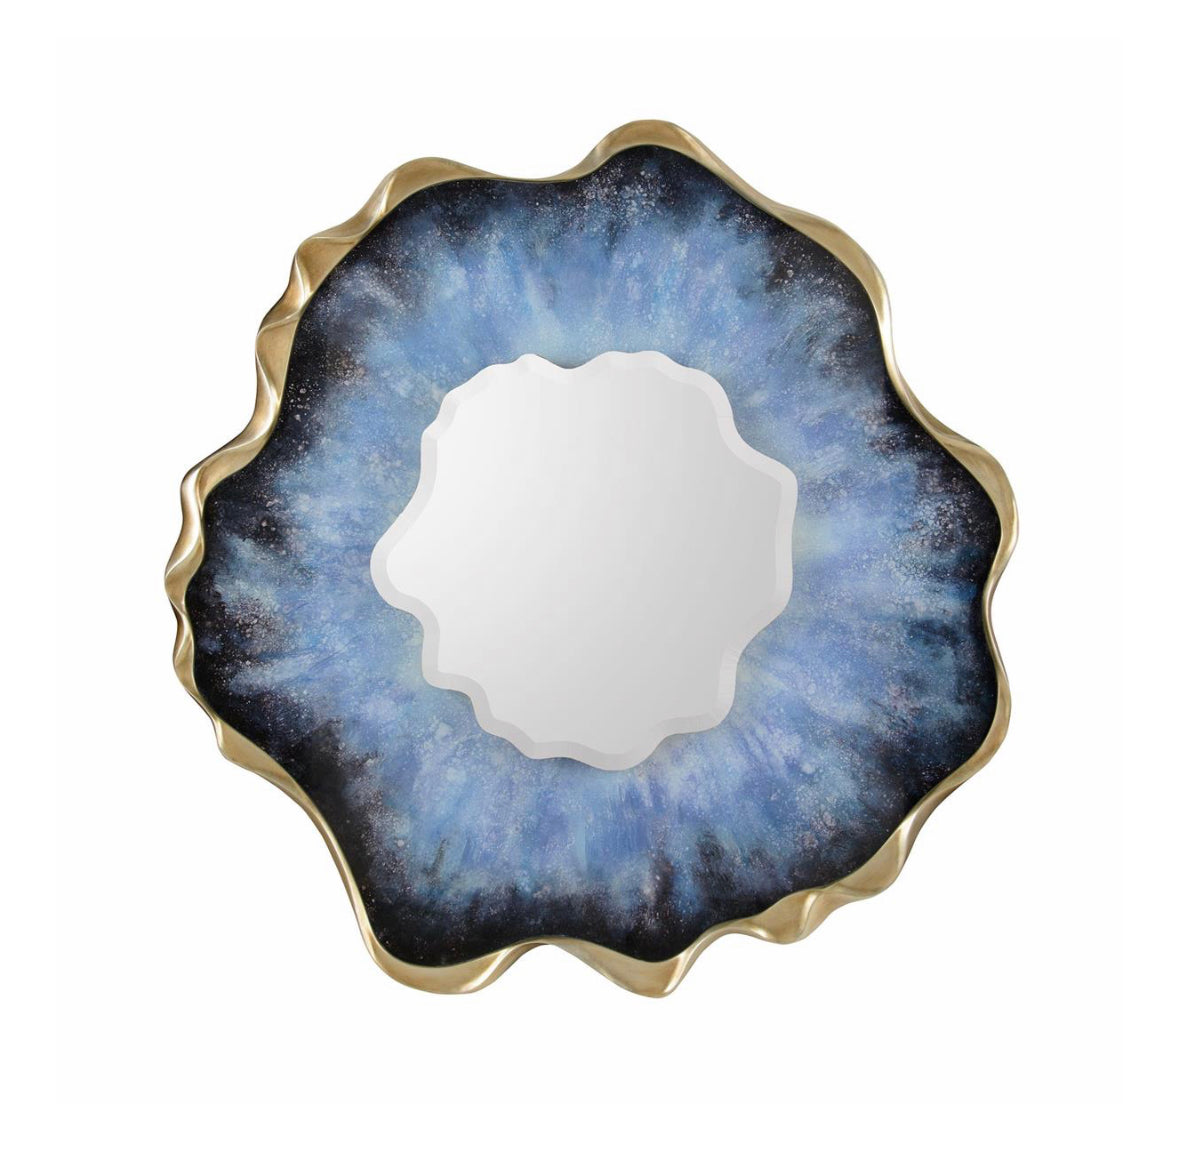 Drago Blue Agate Mirror - Luxury Living Collection